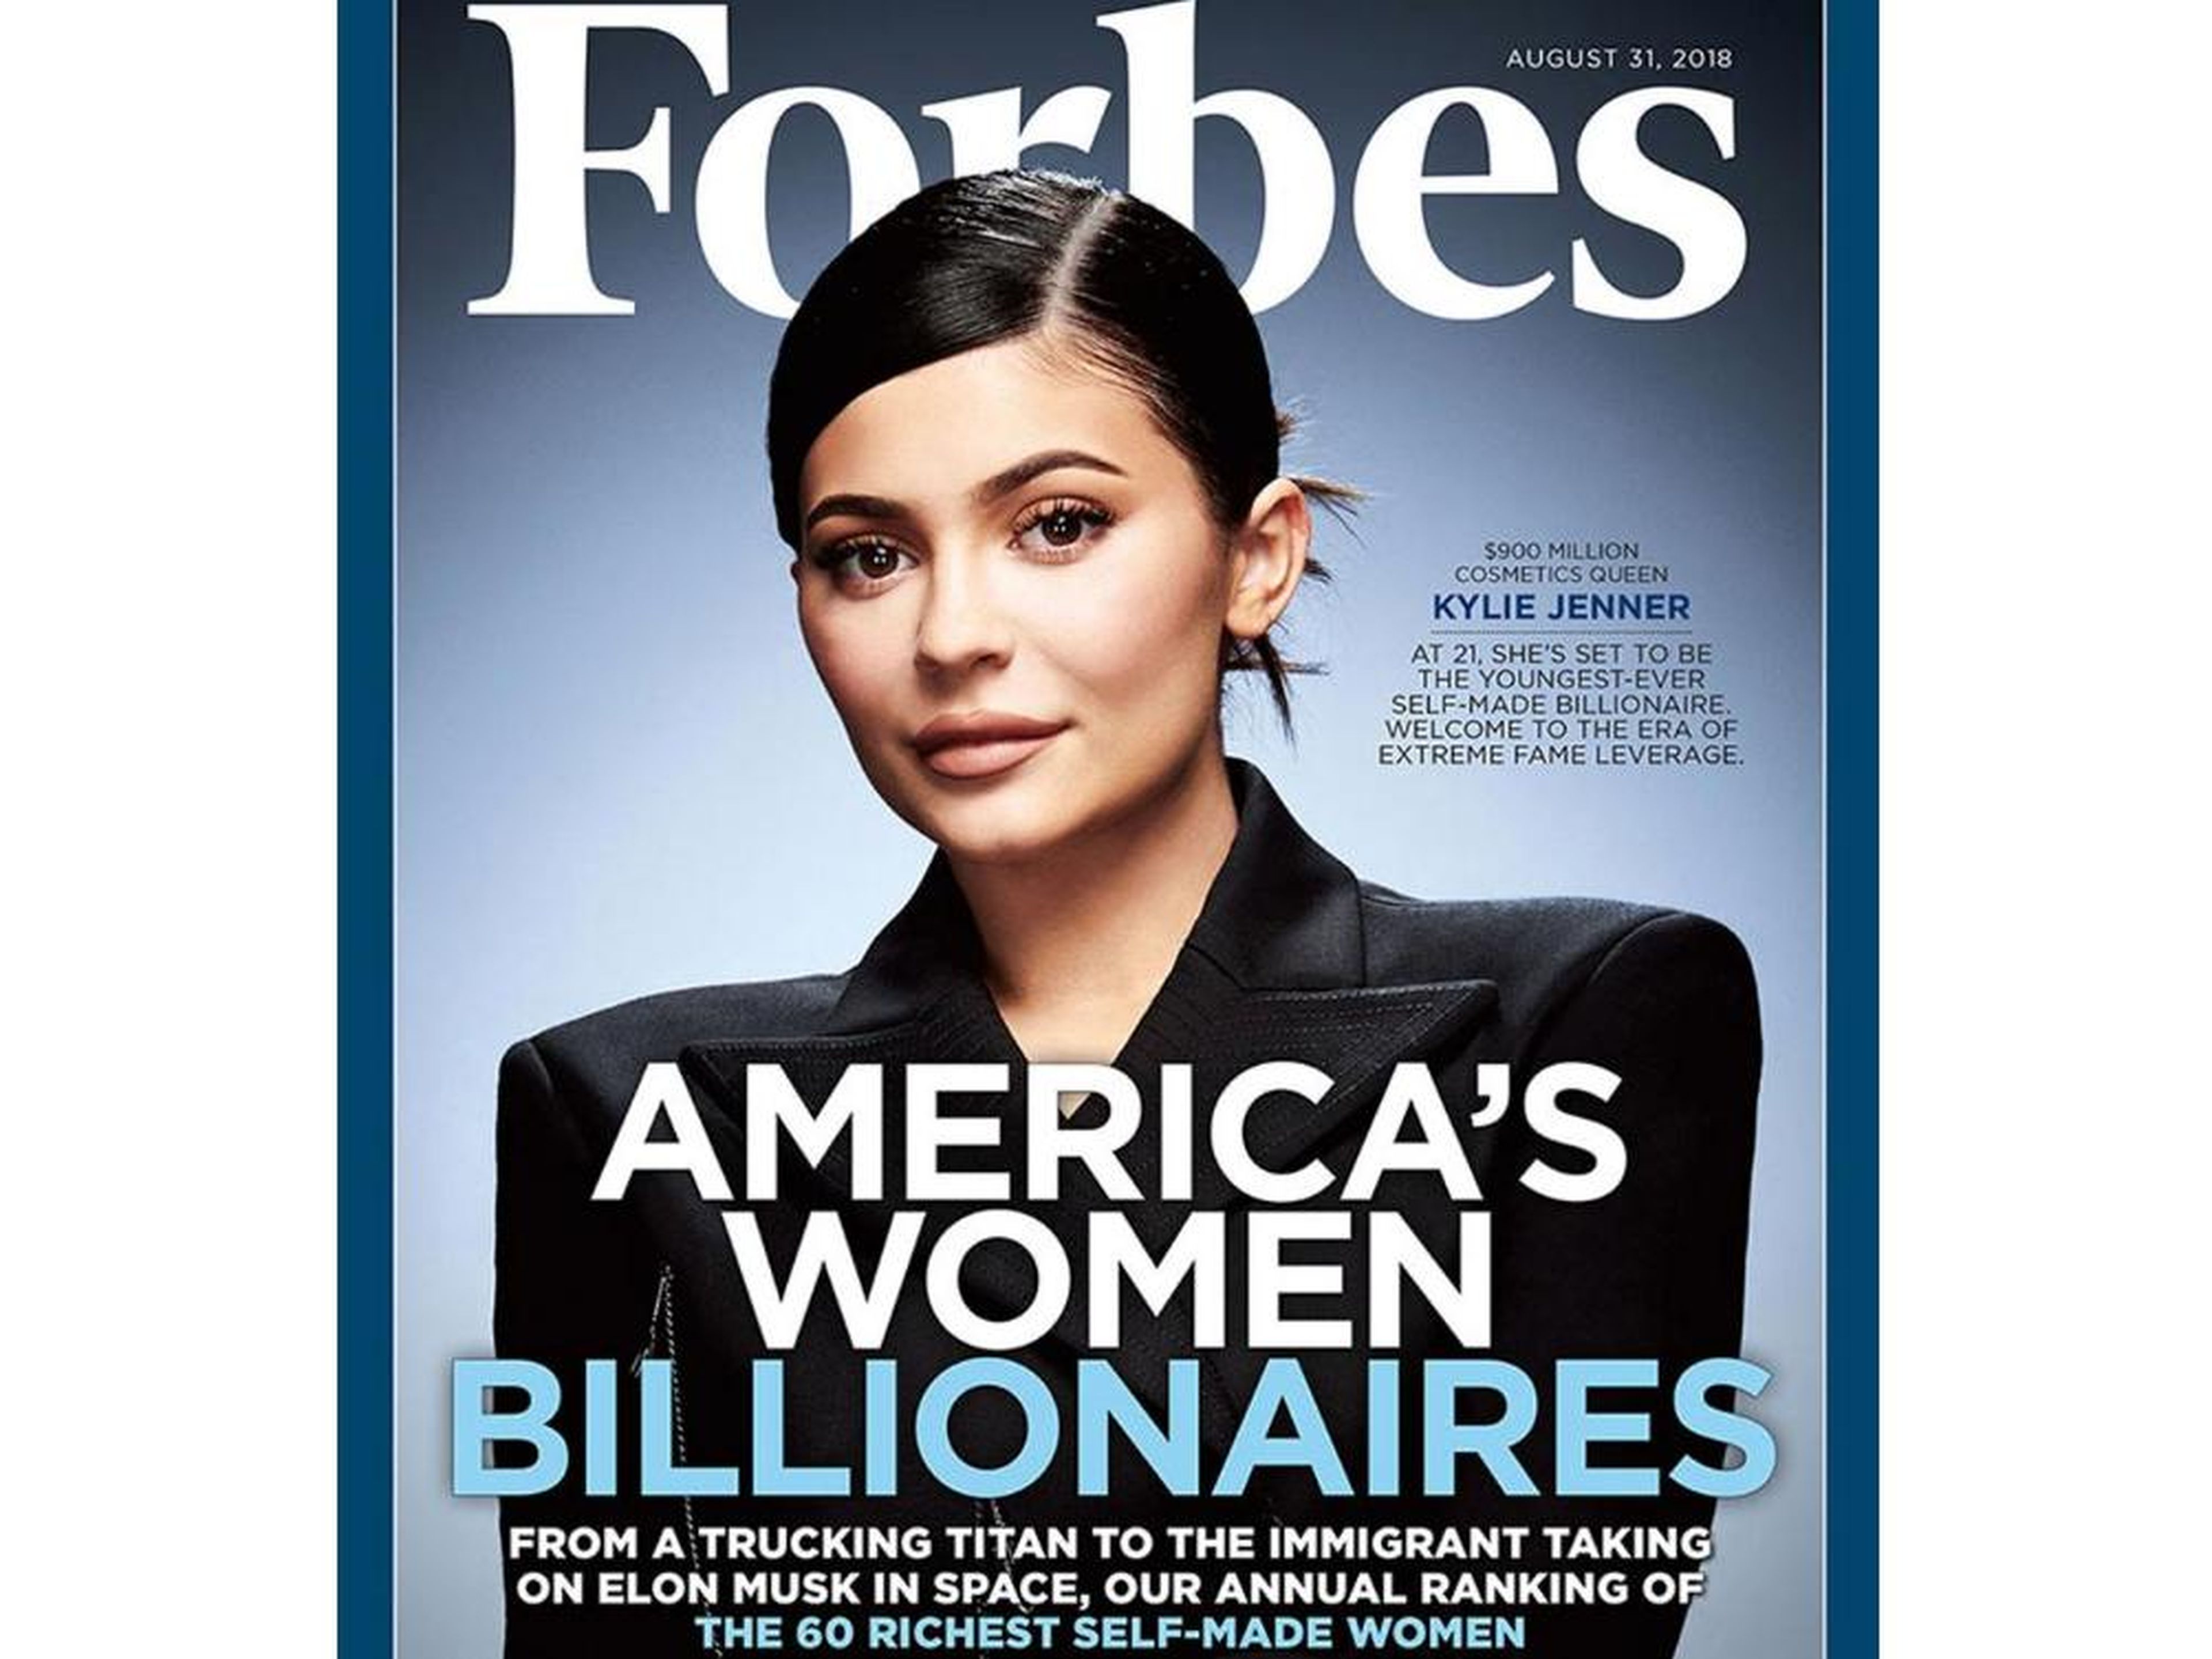 Kylie Jenner is on the cover of Forbes' America's Women Billionaires issue.